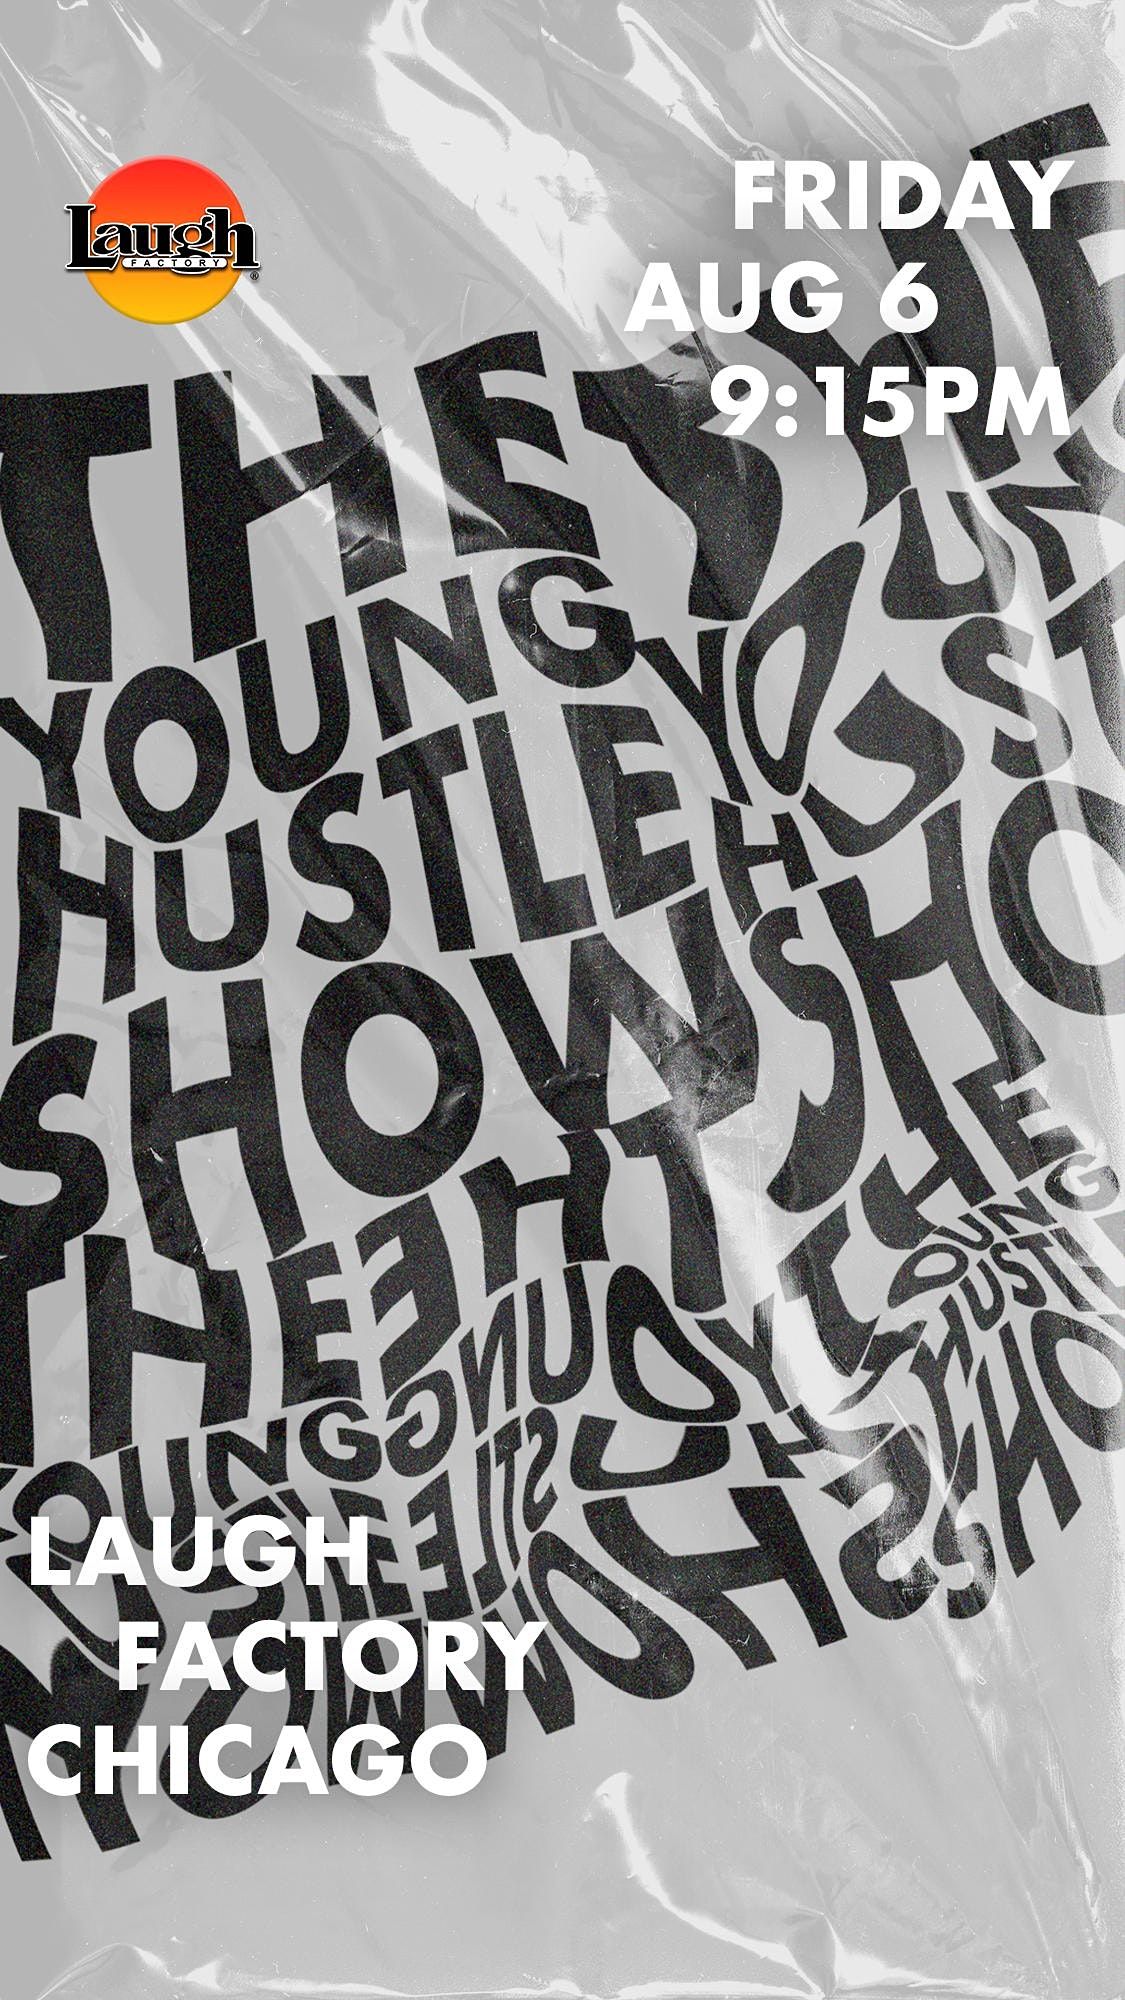 The Young Hustle Show Returns to Laugh Factory Chicago!